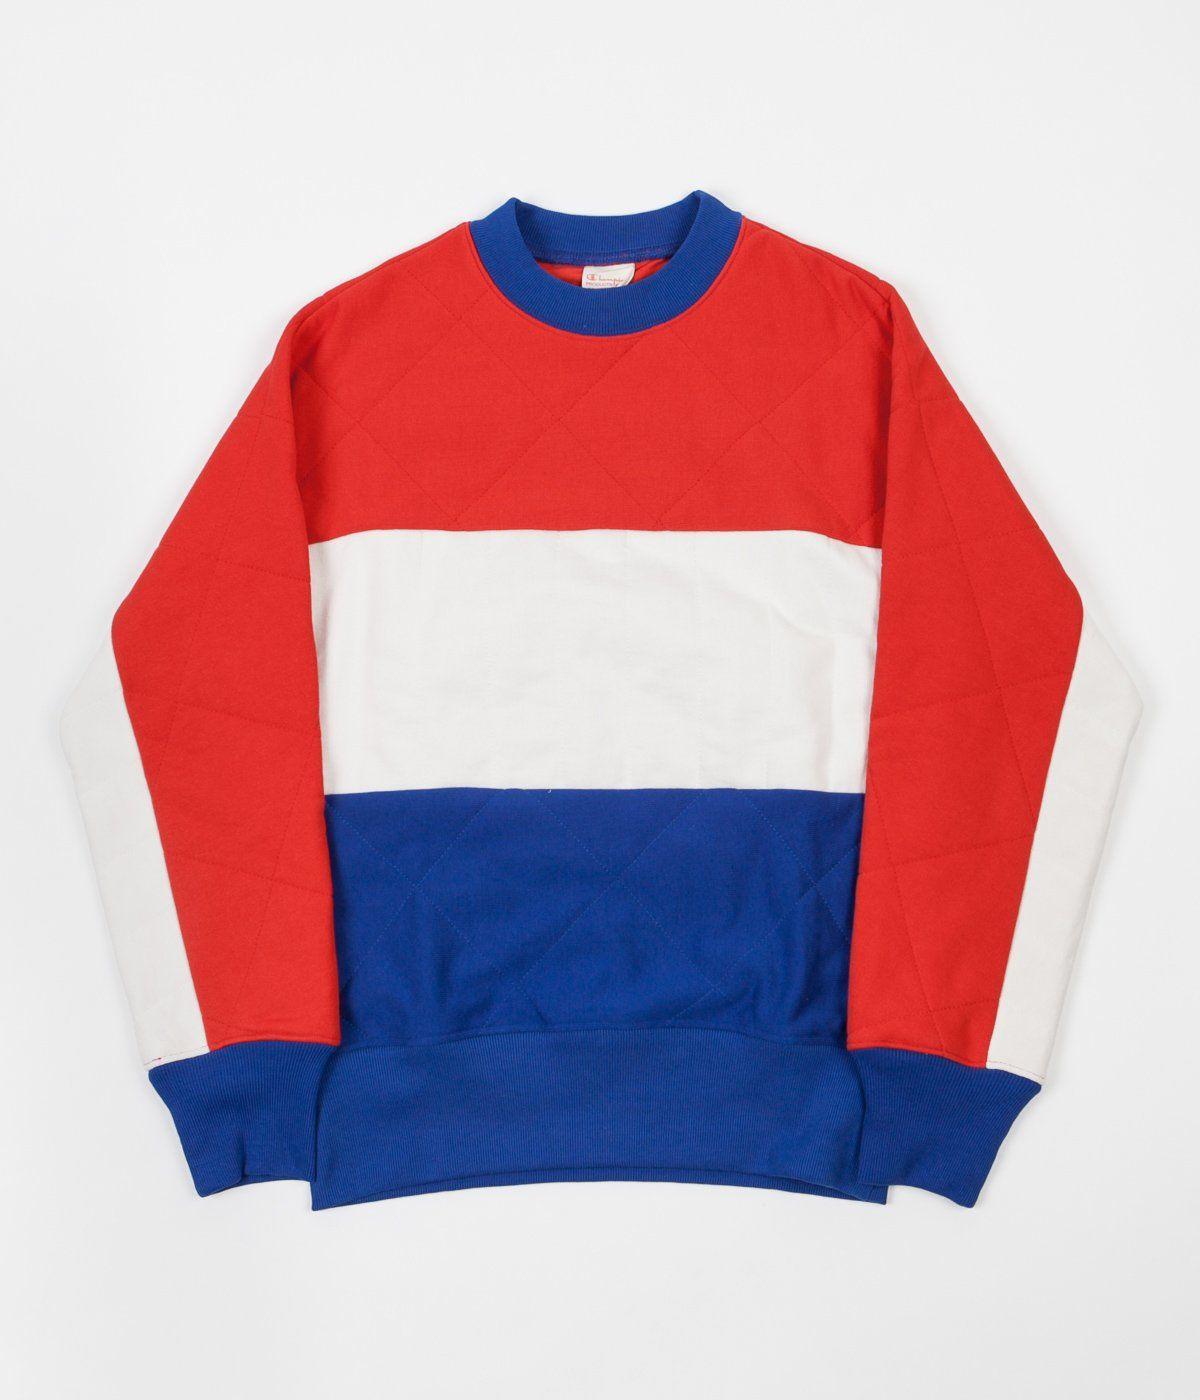 red white and blue champion sweater